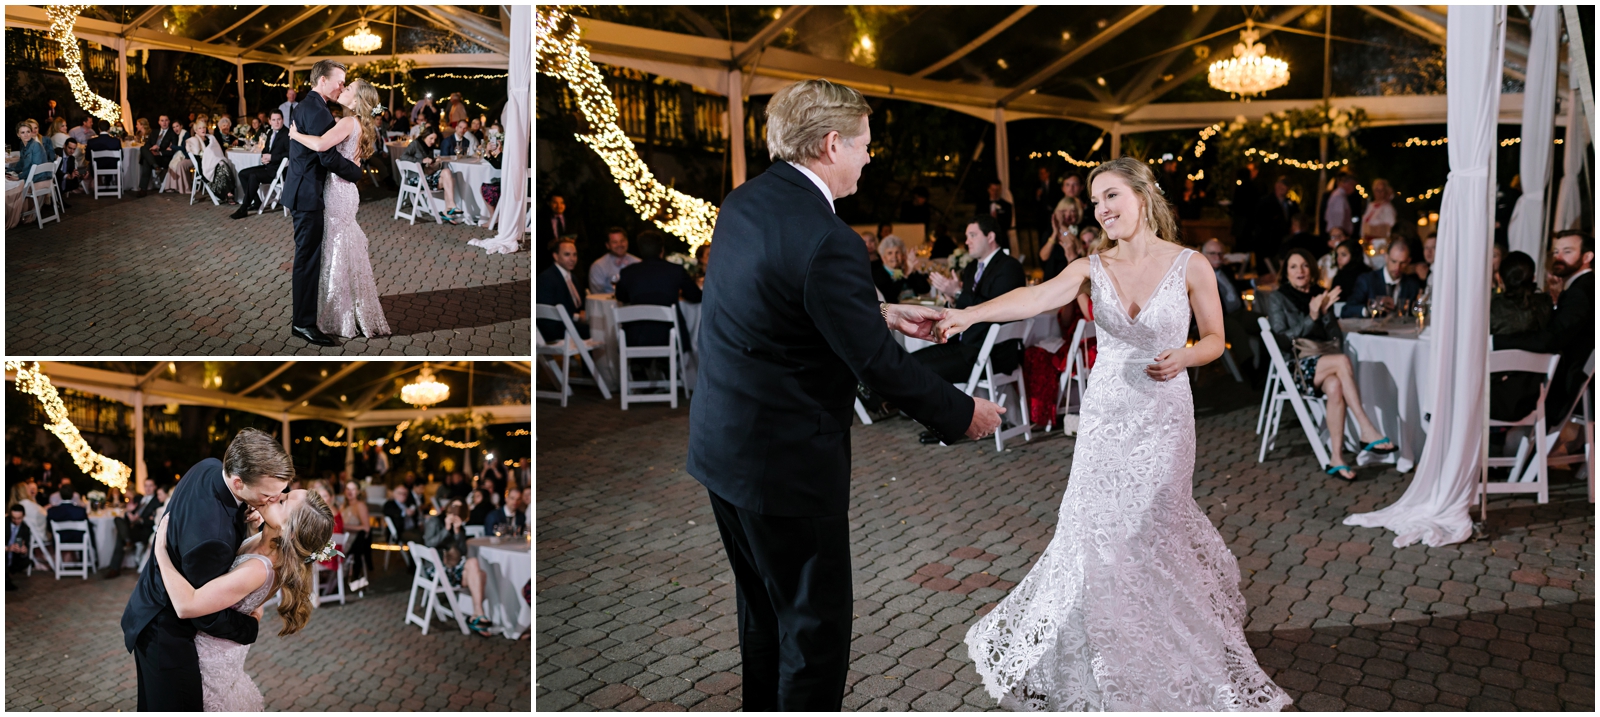  Bride and groom first dance 